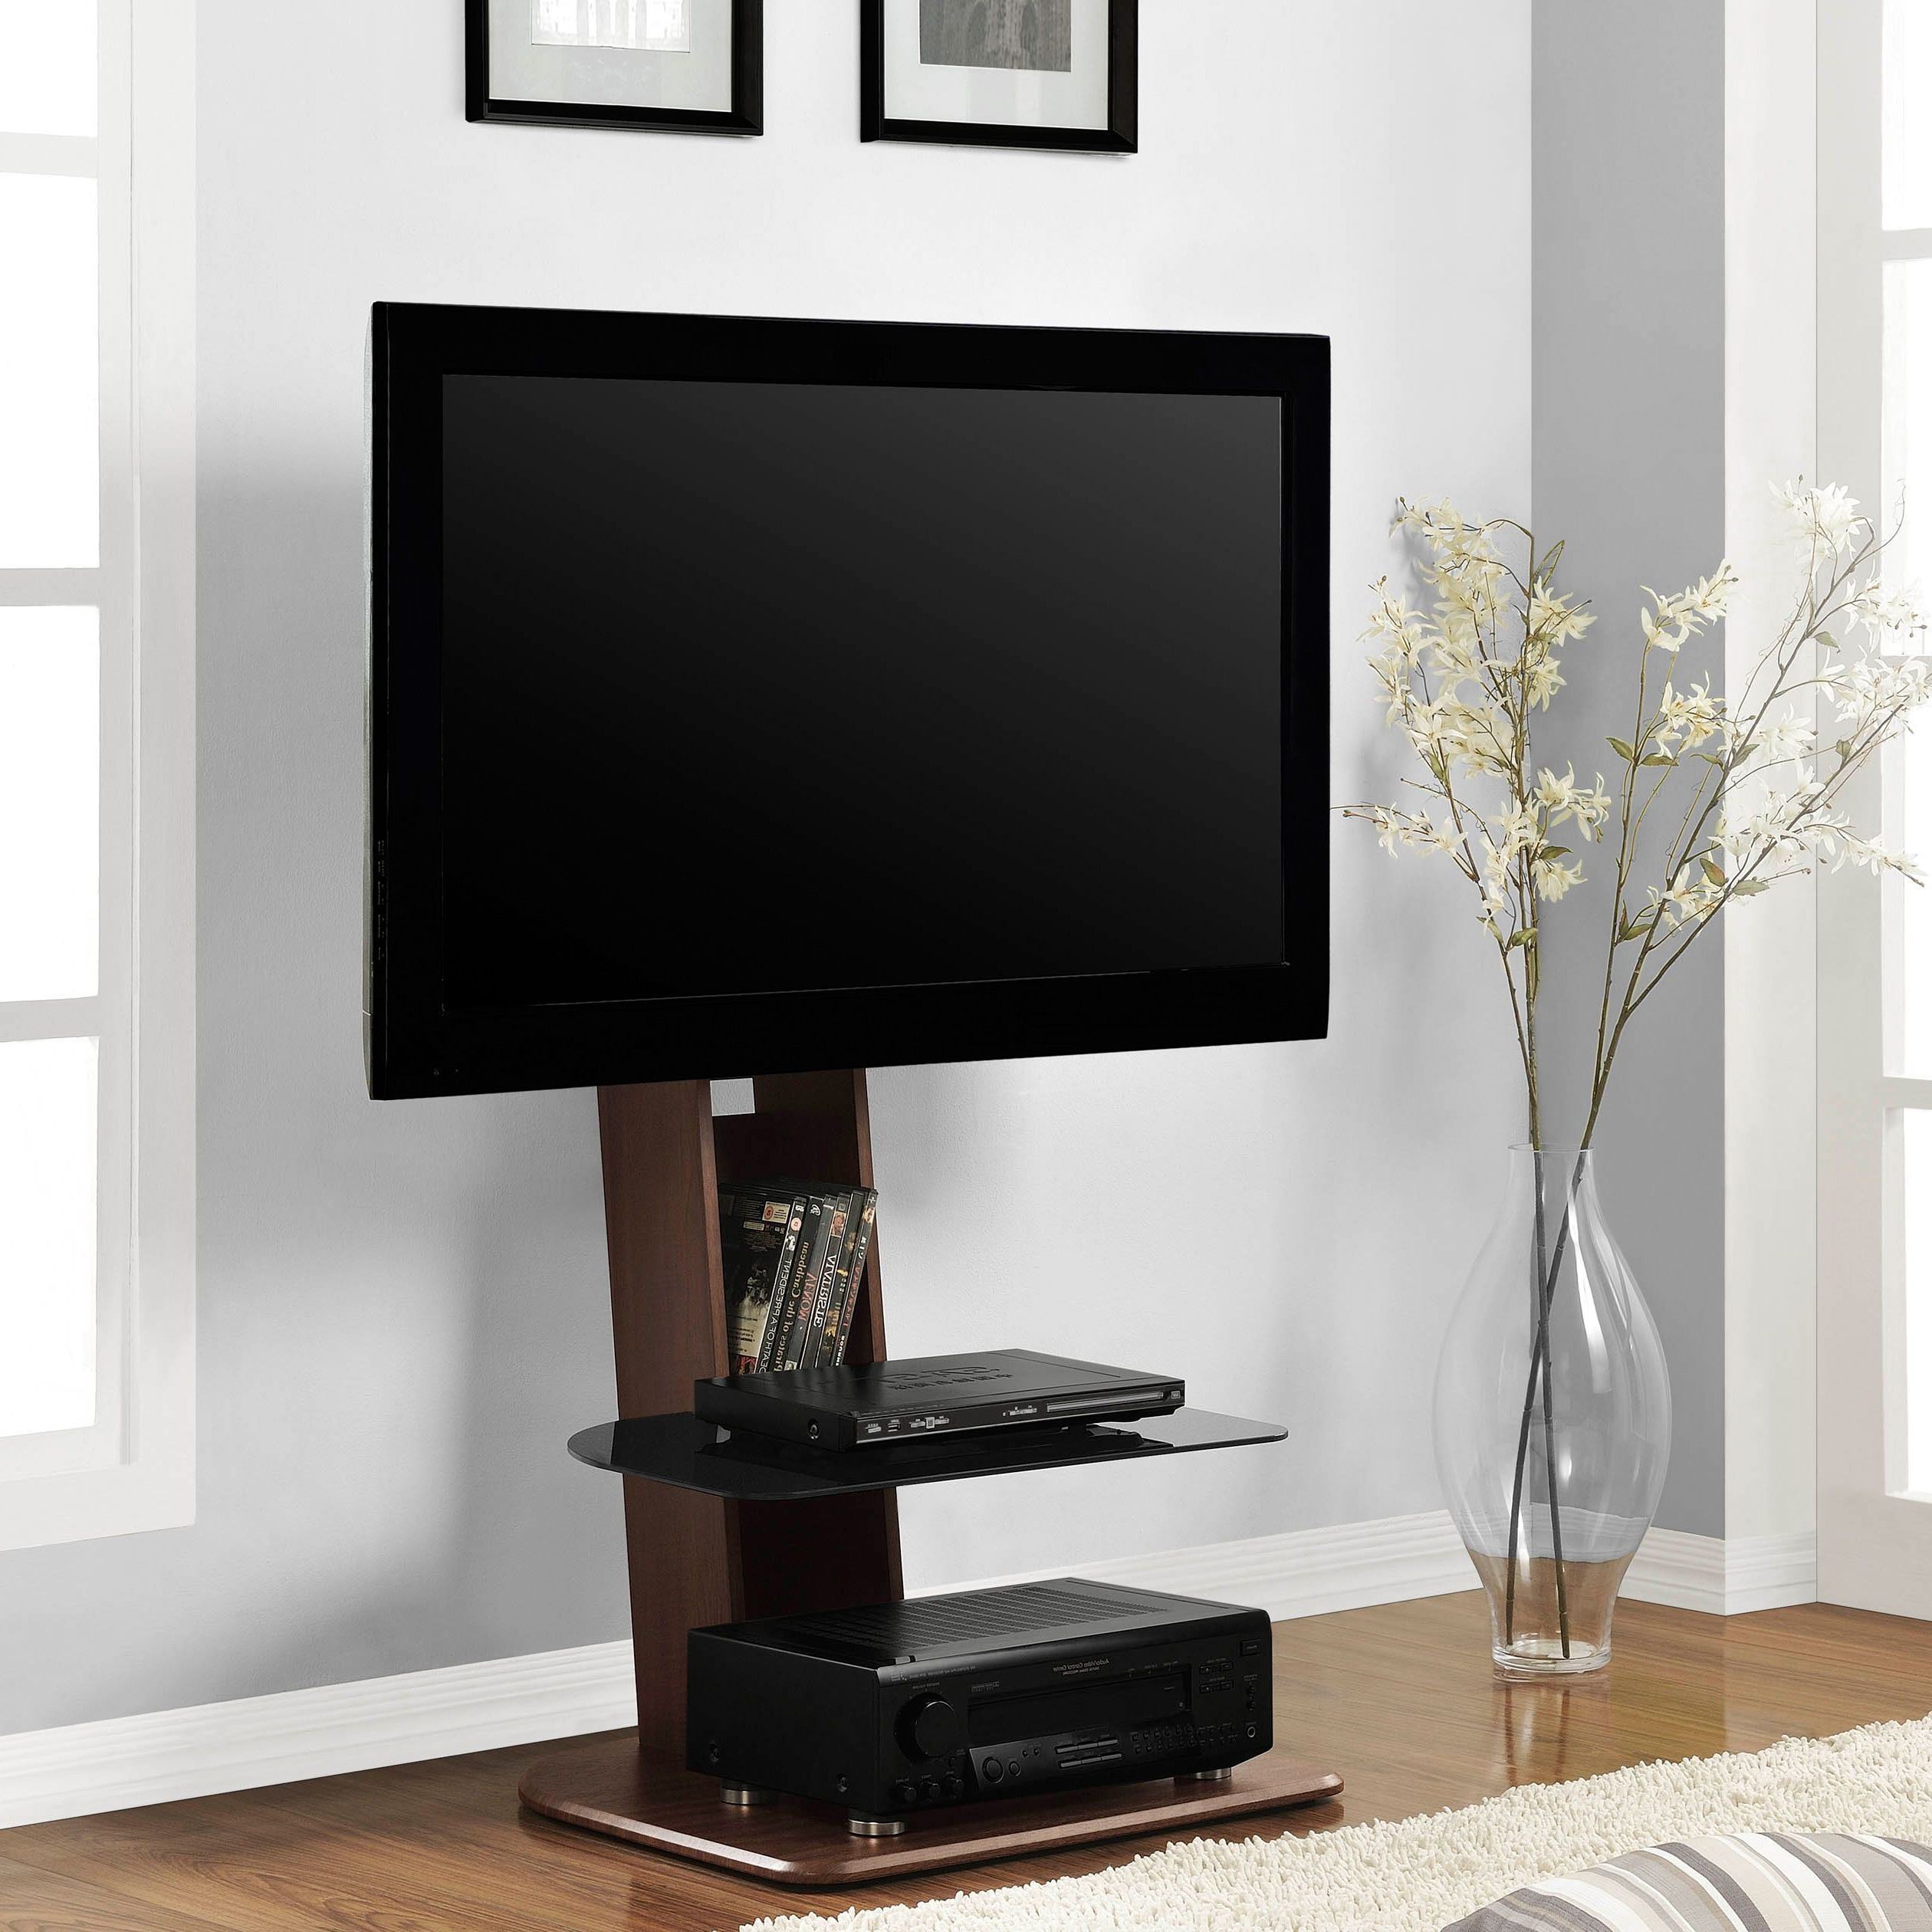 Get The Skinny On This Space Saving Tv Stand Featuring A Streamlined For Fashionable Skinny Tv Stands (Photo 4 of 20)